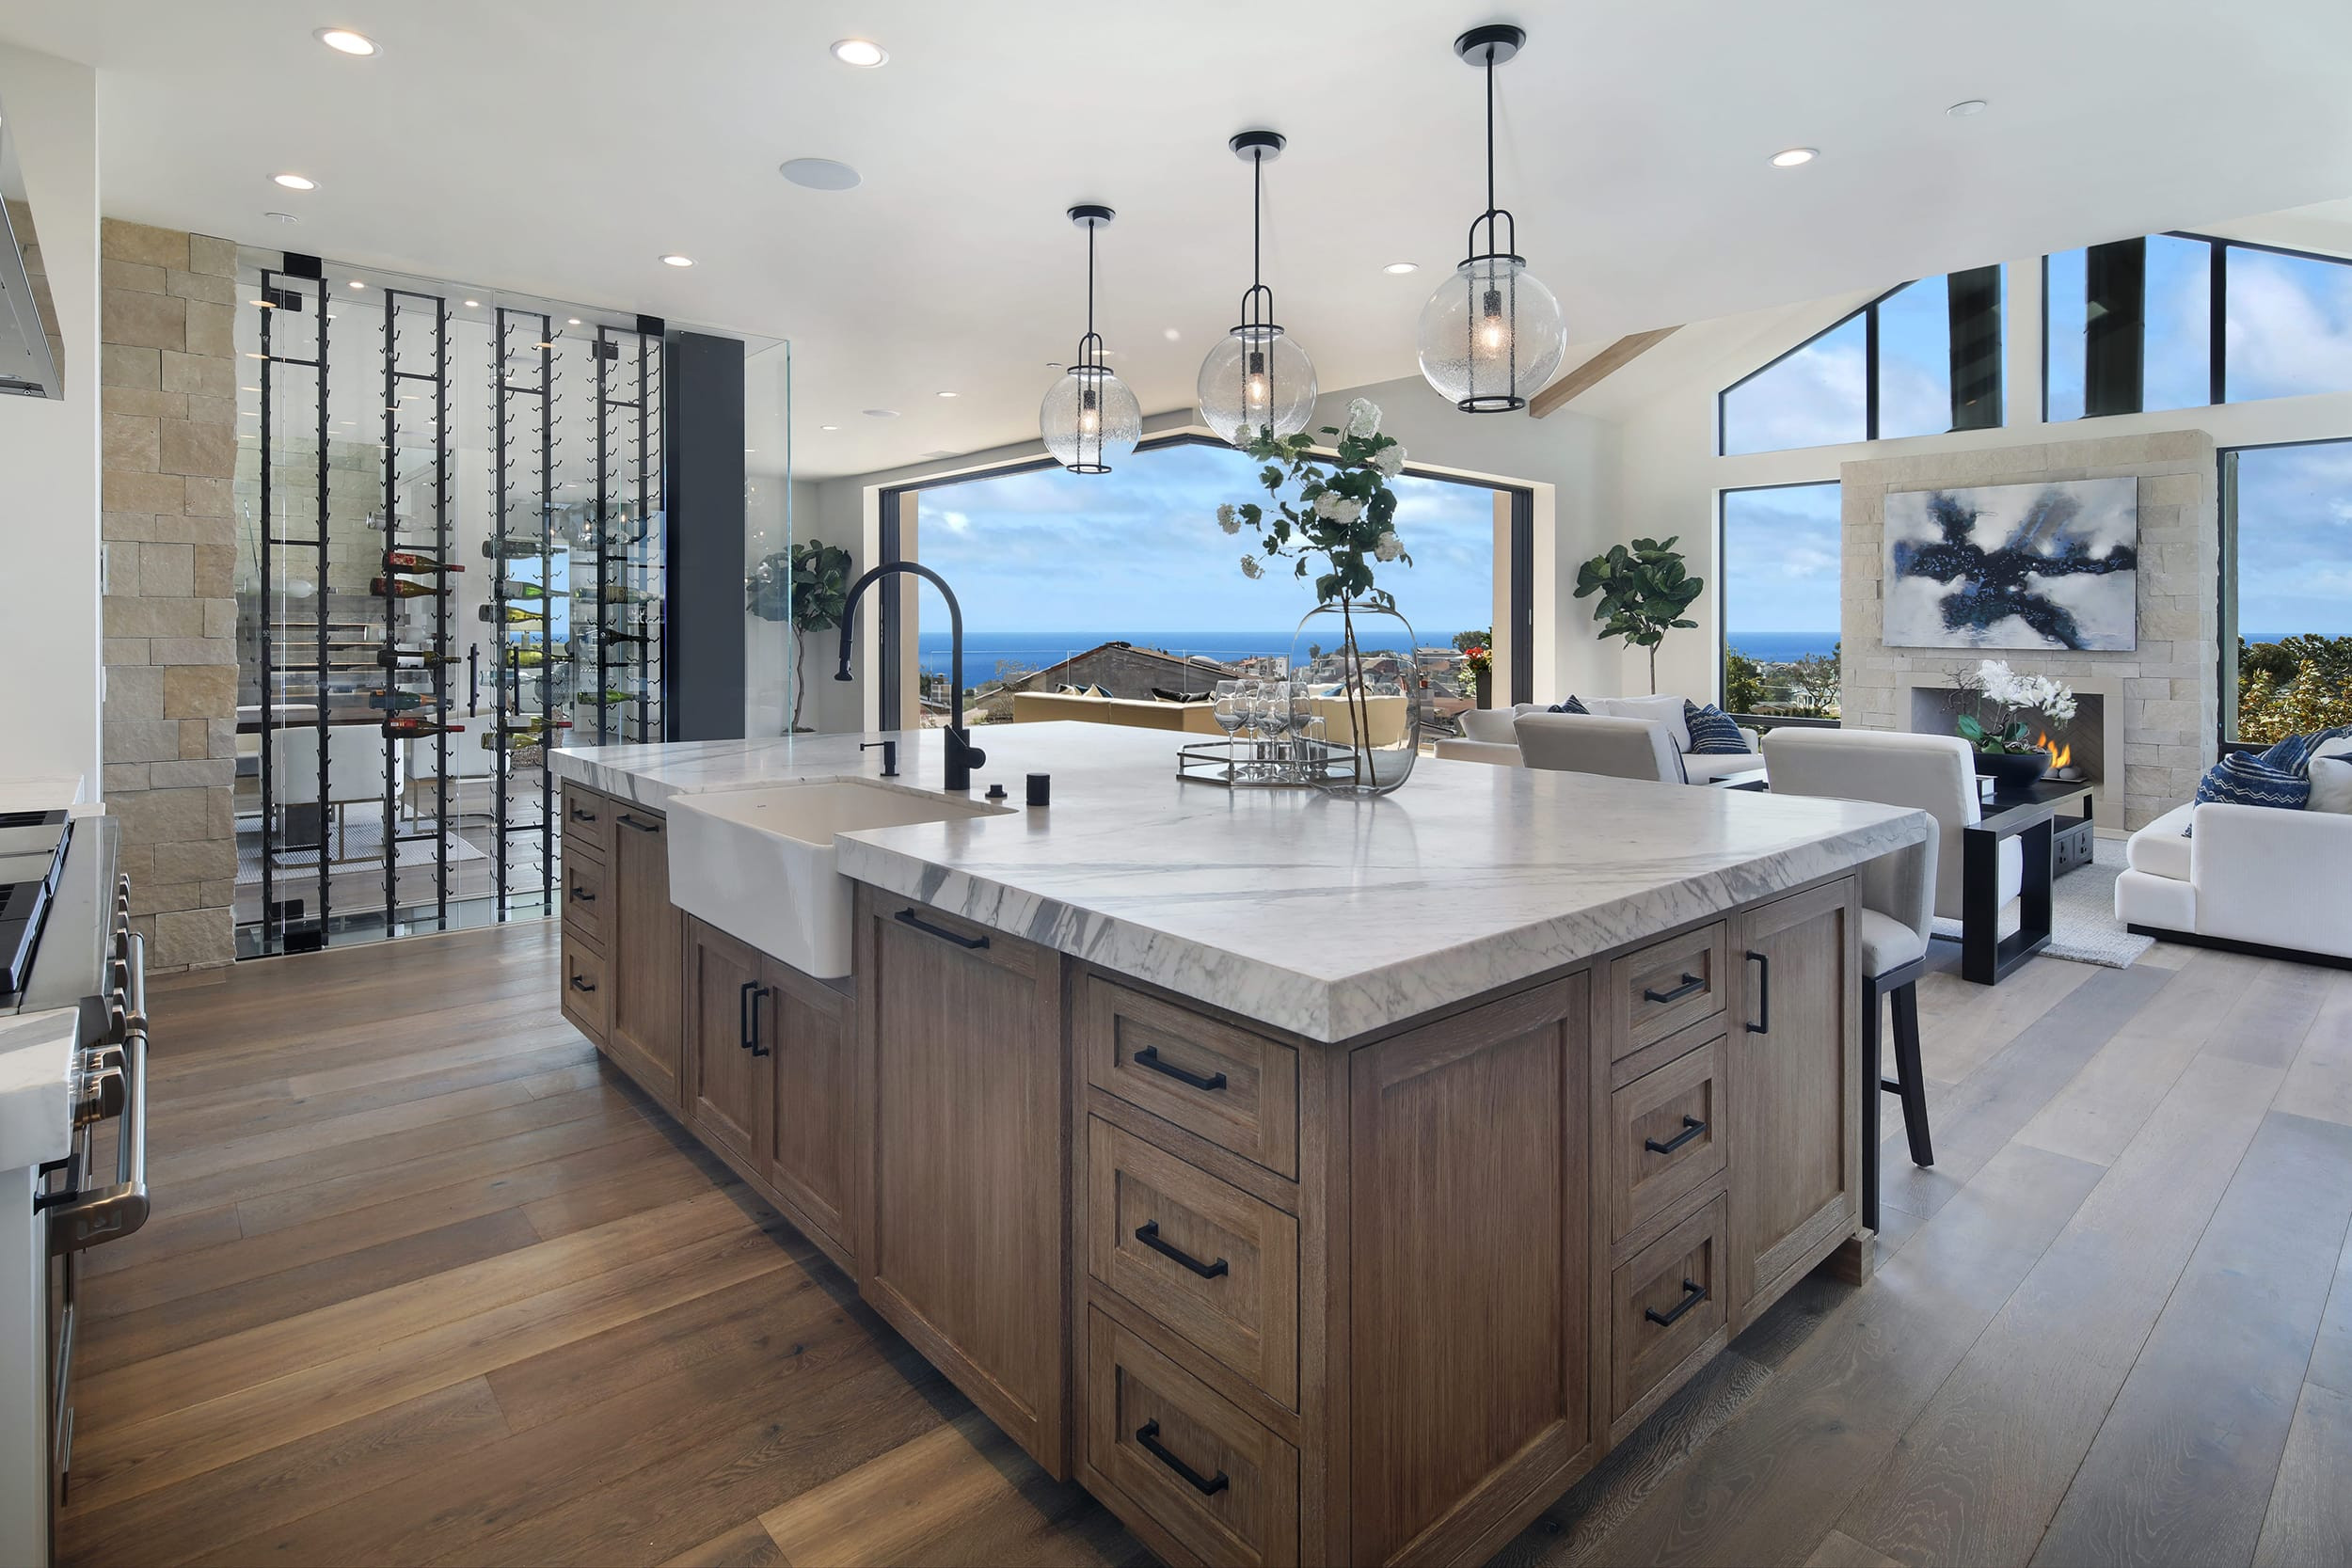 Kitchen Design Trends 2019
 Top 2019 Kitchen Design Trends You Will Be Seeing